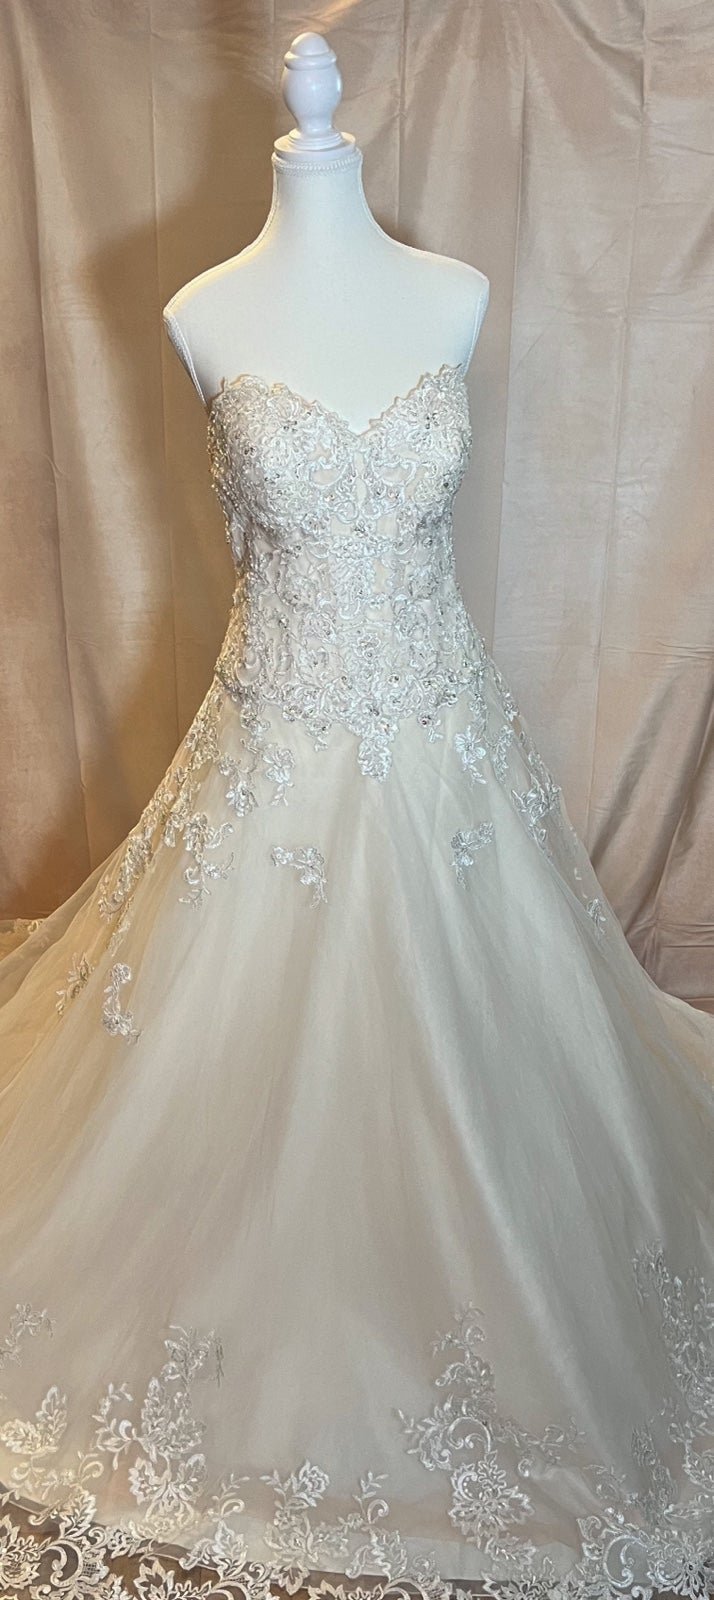 Perfect Brand New JEWEL beaded lace and tulle ball gown wedding dress HgQk53Hfw Counter Genuine 